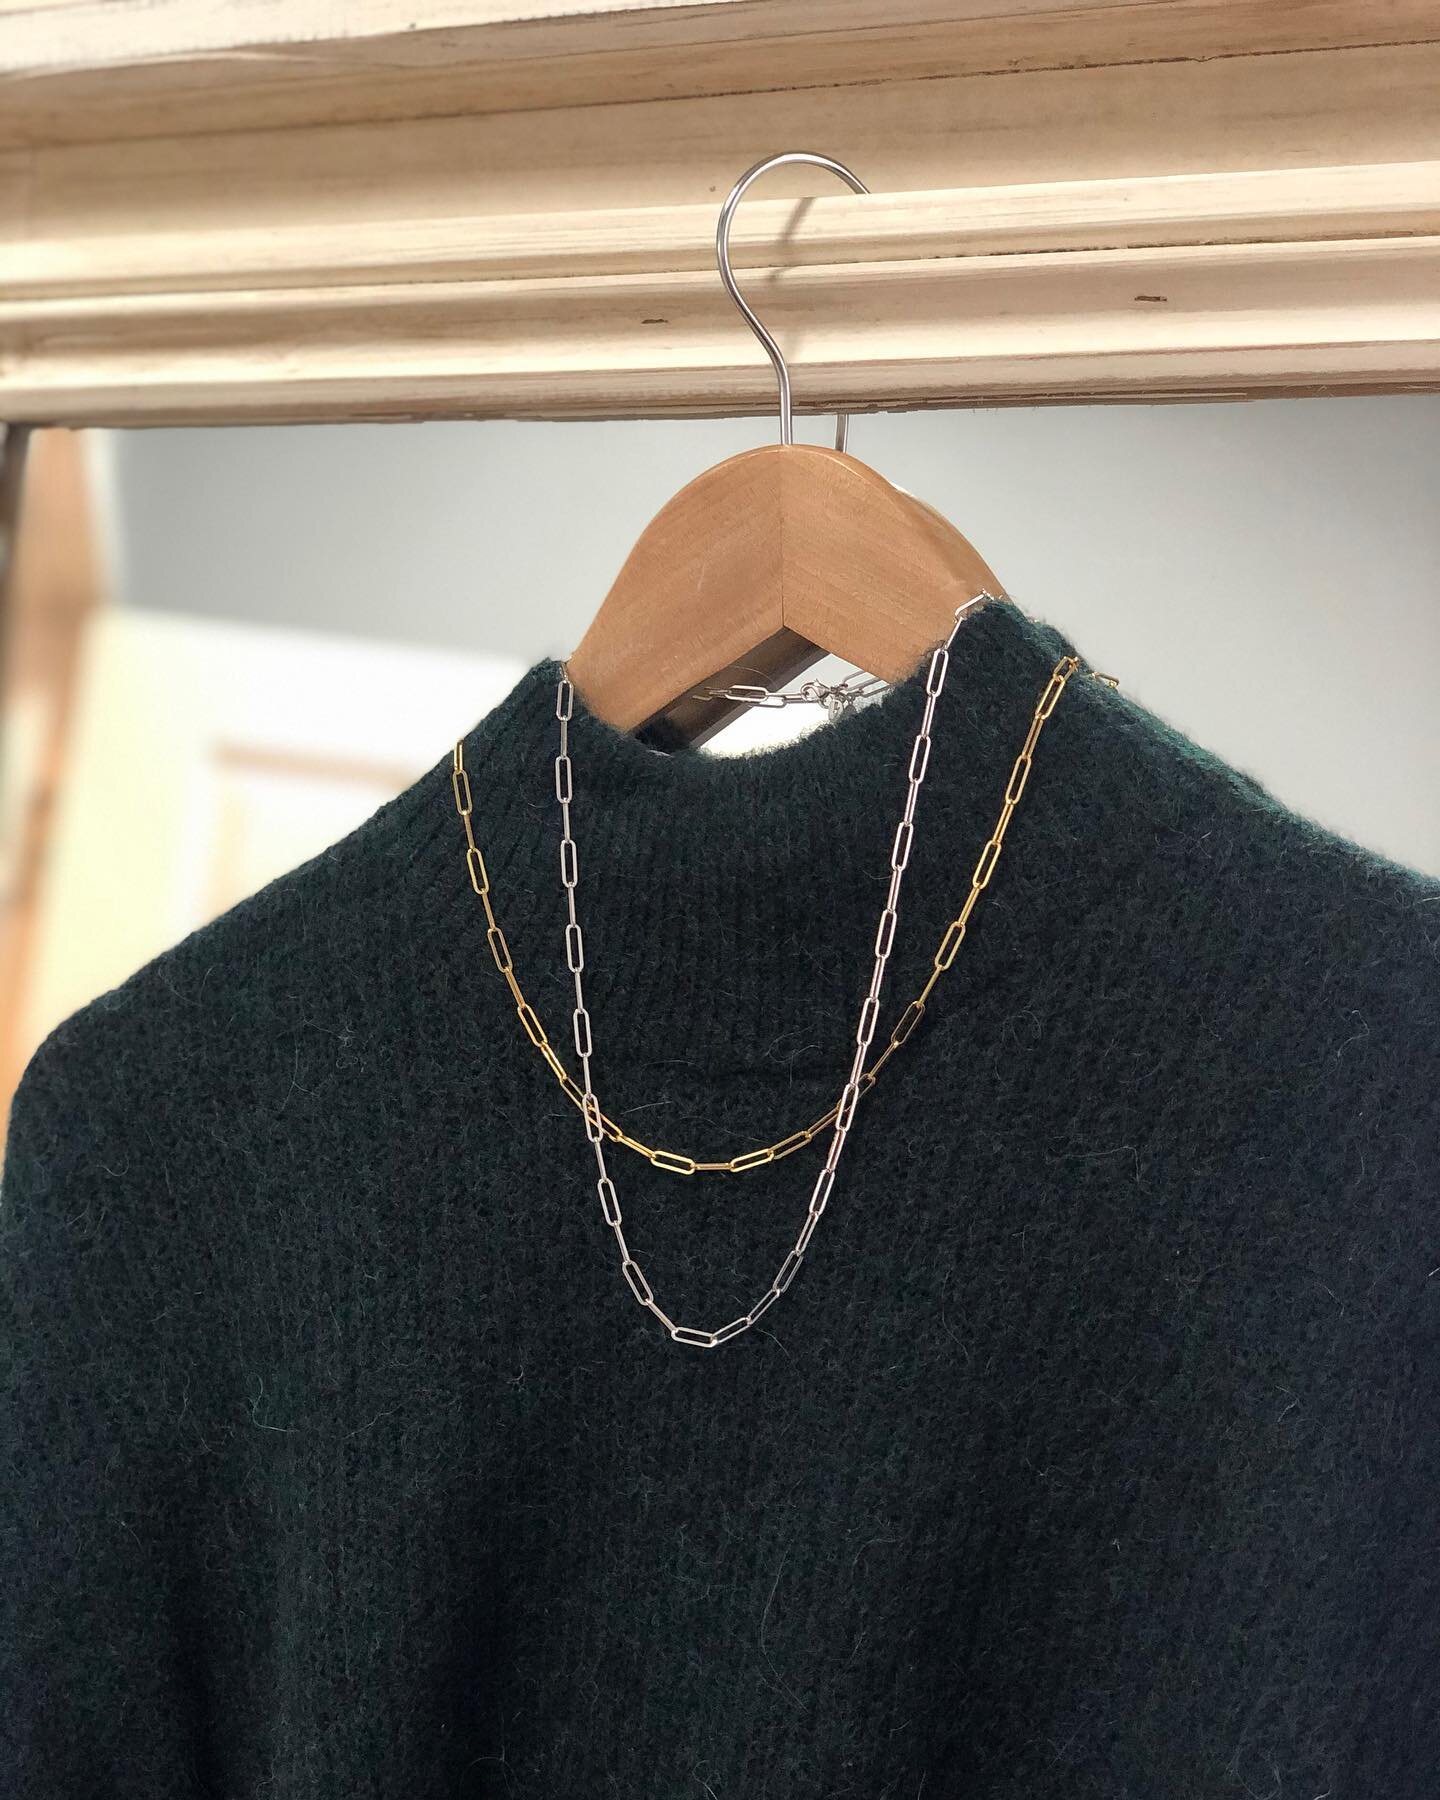 How gorgeous are the fab long link chain necklaces from @screamprettystyle would you want silver or 18k gold plated? 🤩 Looks fab over our chunky @selectedofficial jumper too! 
.
.
.
.
#chain #longlinkchain #necklace #jewellery #wiw #layeringnecklace